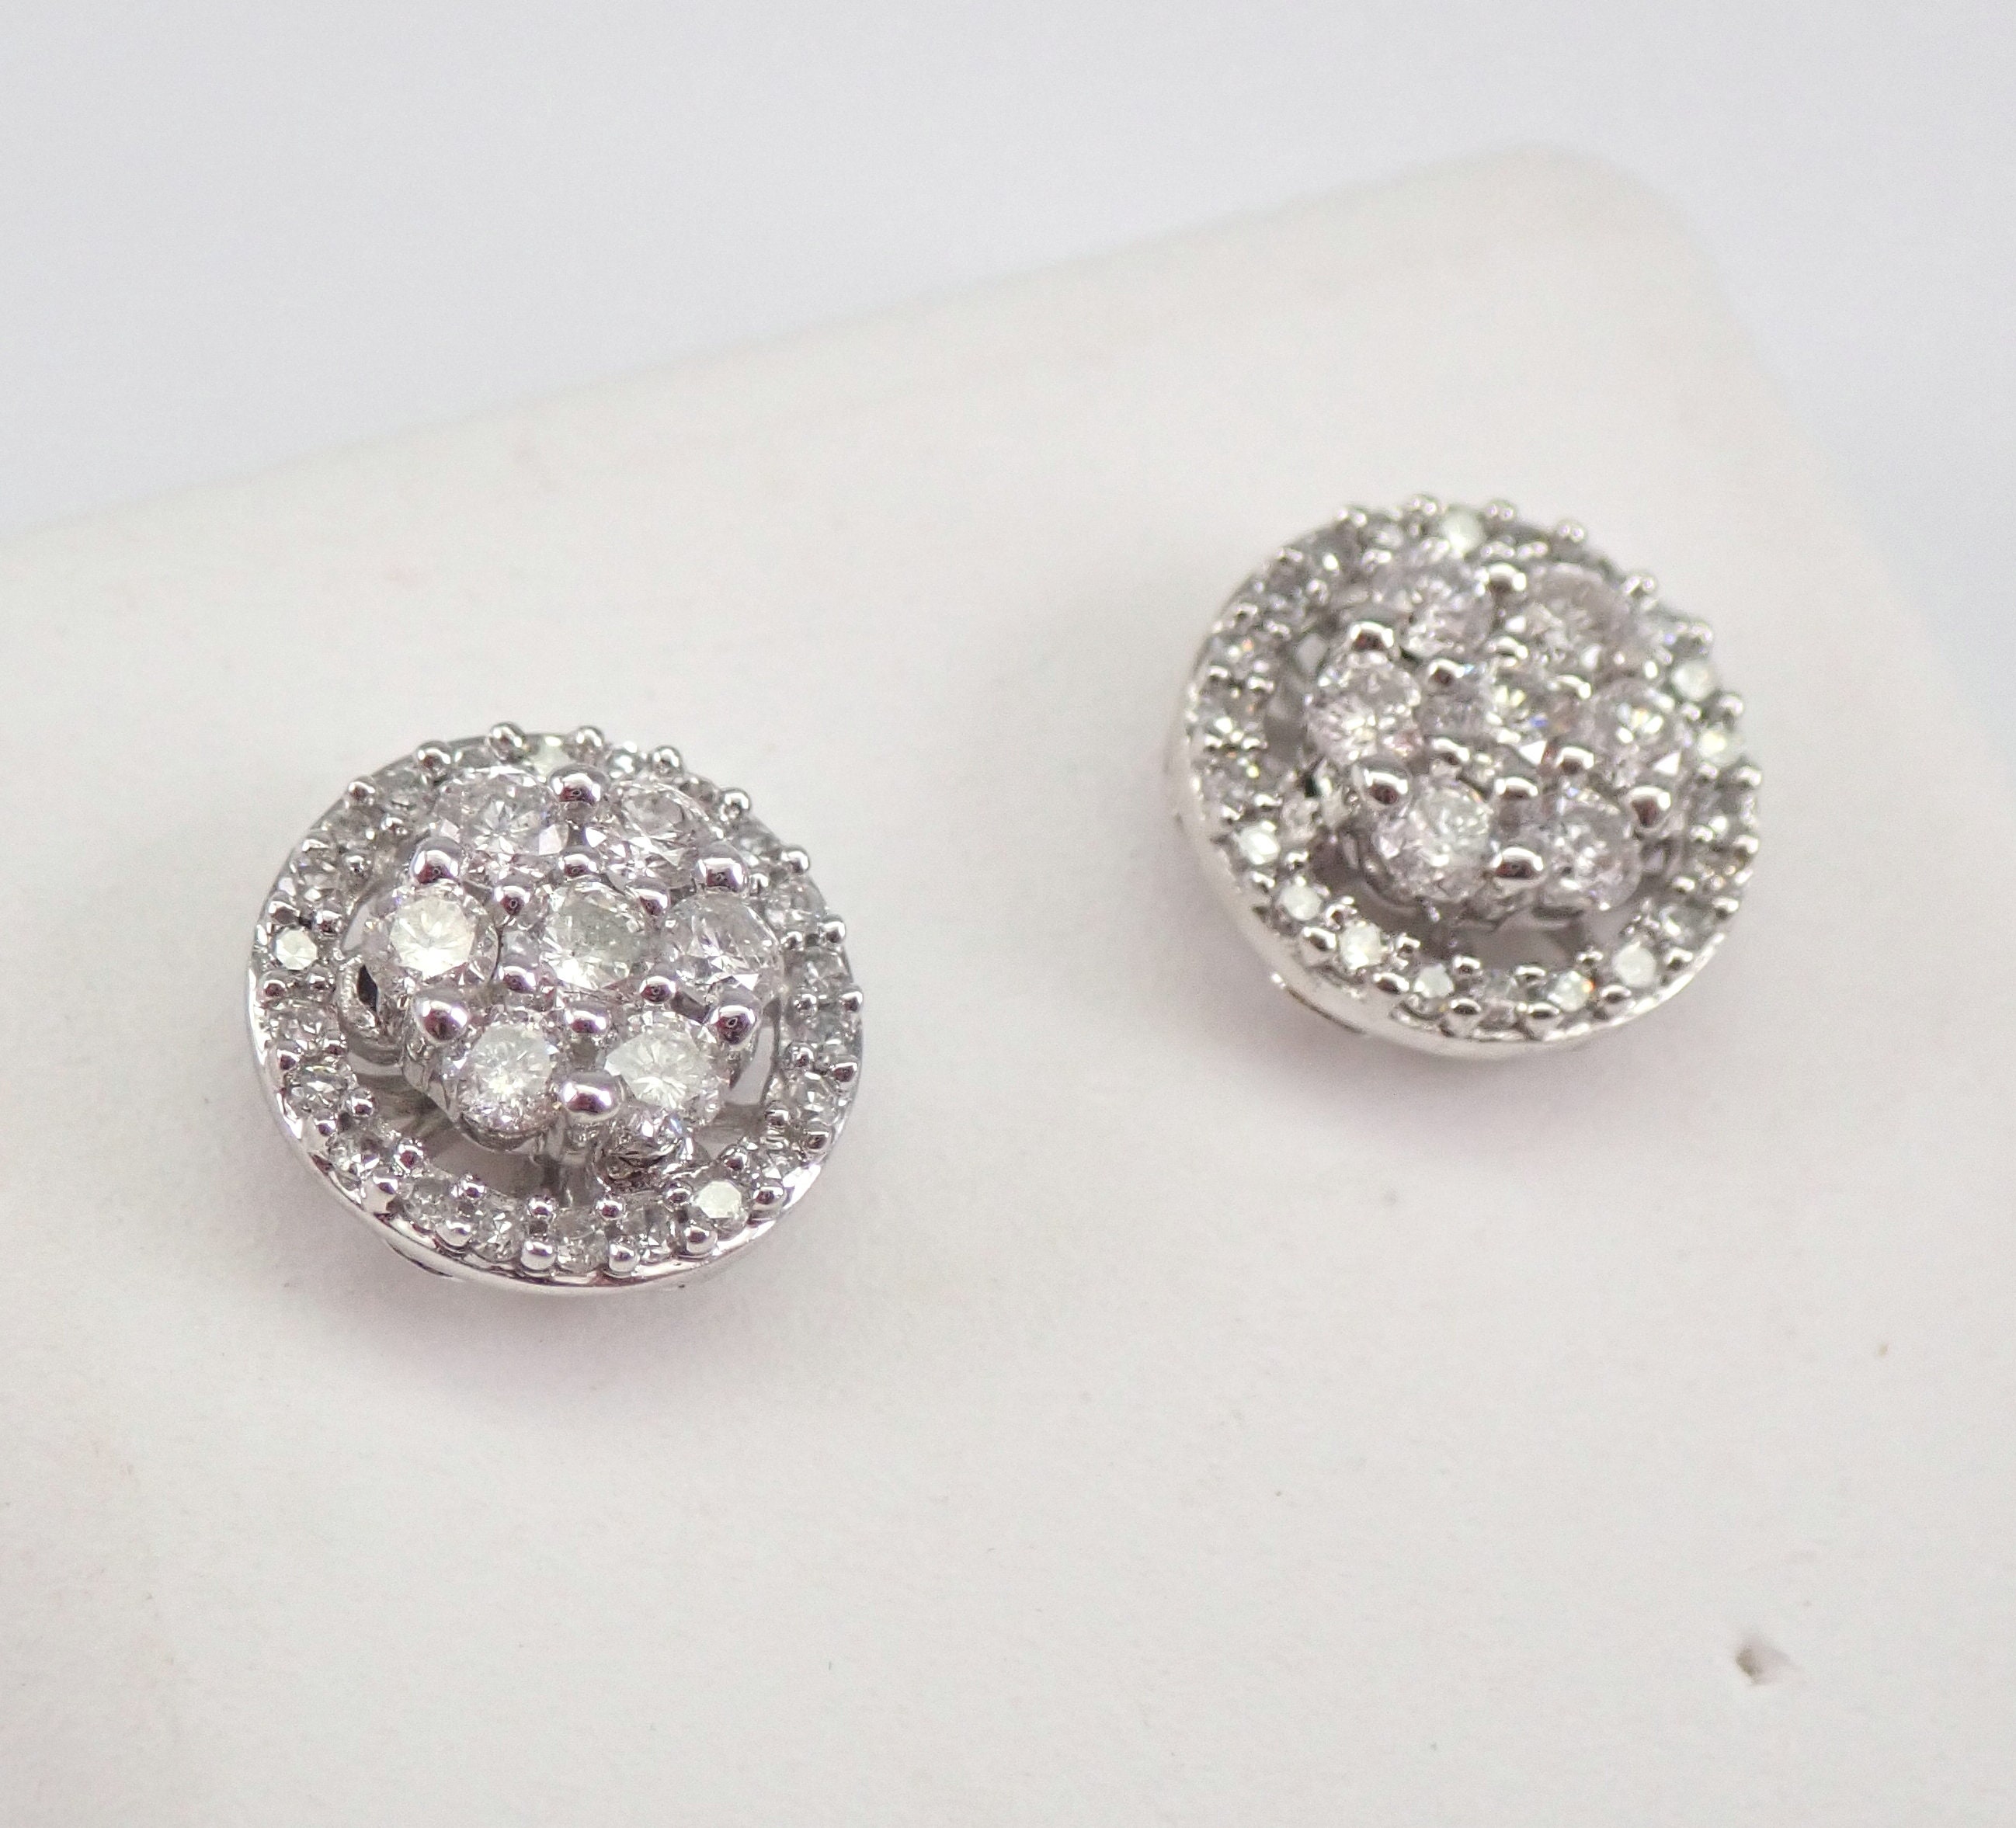 White Gold Diamond Studs Cluster Halo Stud Earrings 1/2 ct FREE SHIPPING